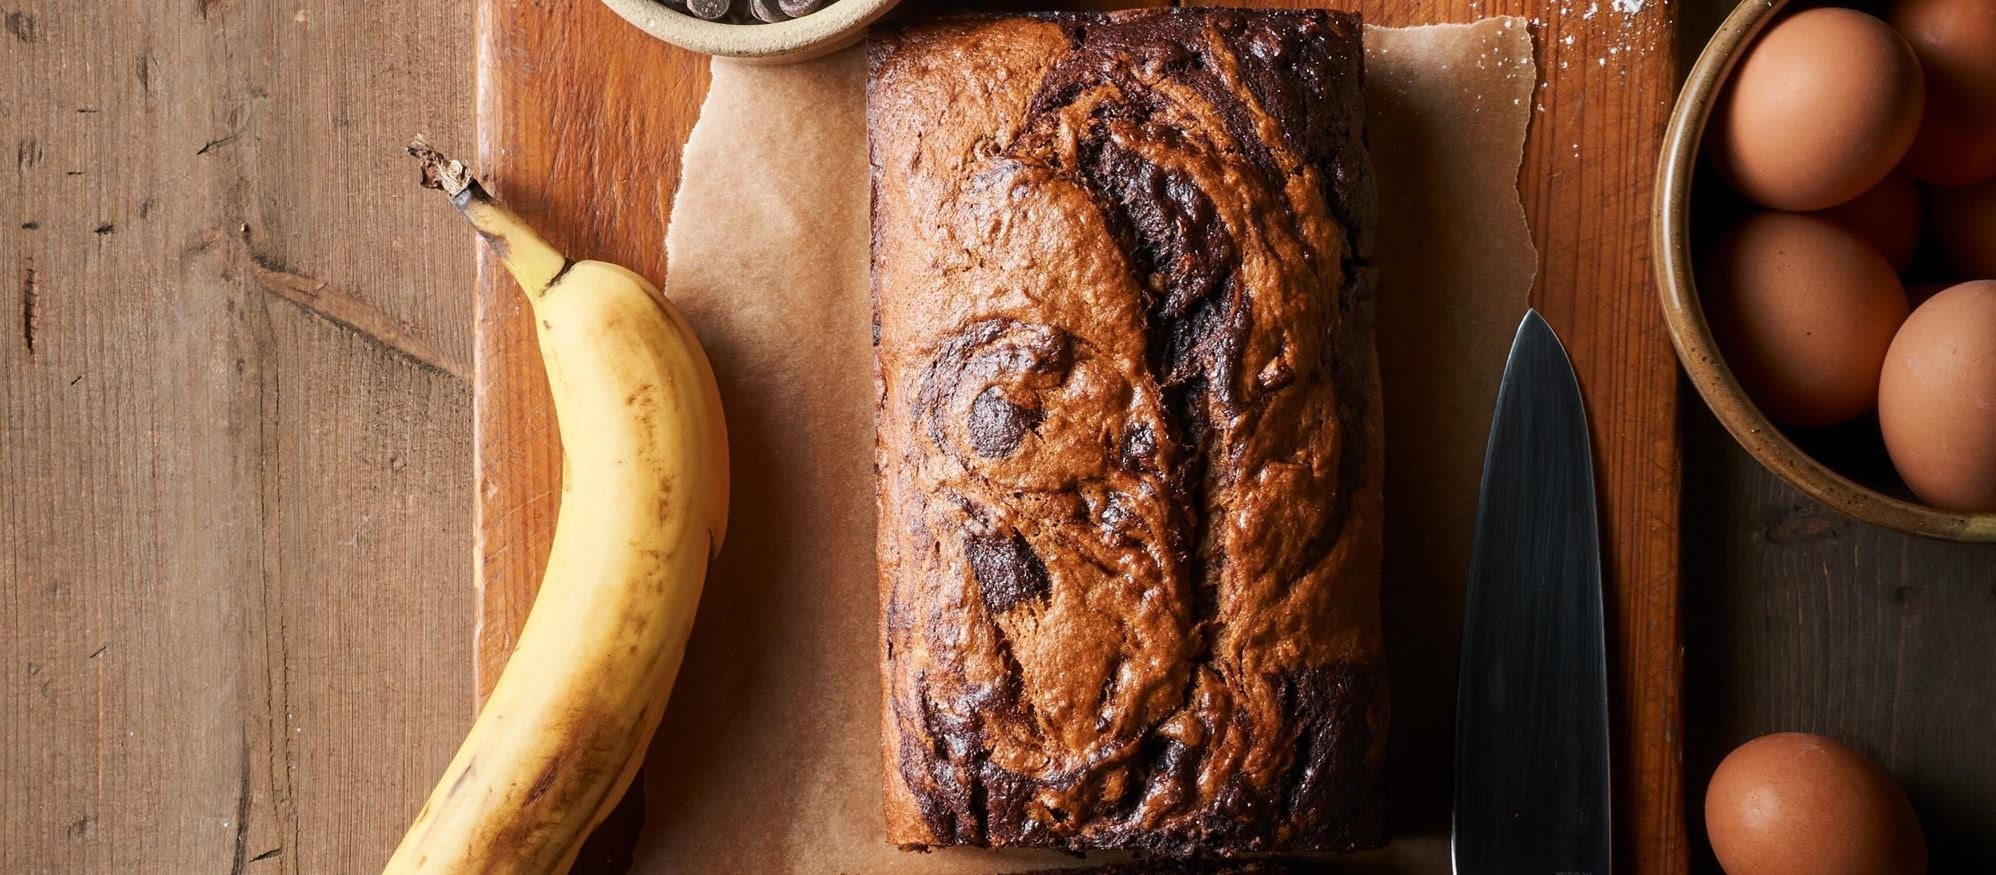 Easy and delicious Cinnamon Chocolate Chip Banana Bread recipe using the Bake Mode setting of your Wolf Oven